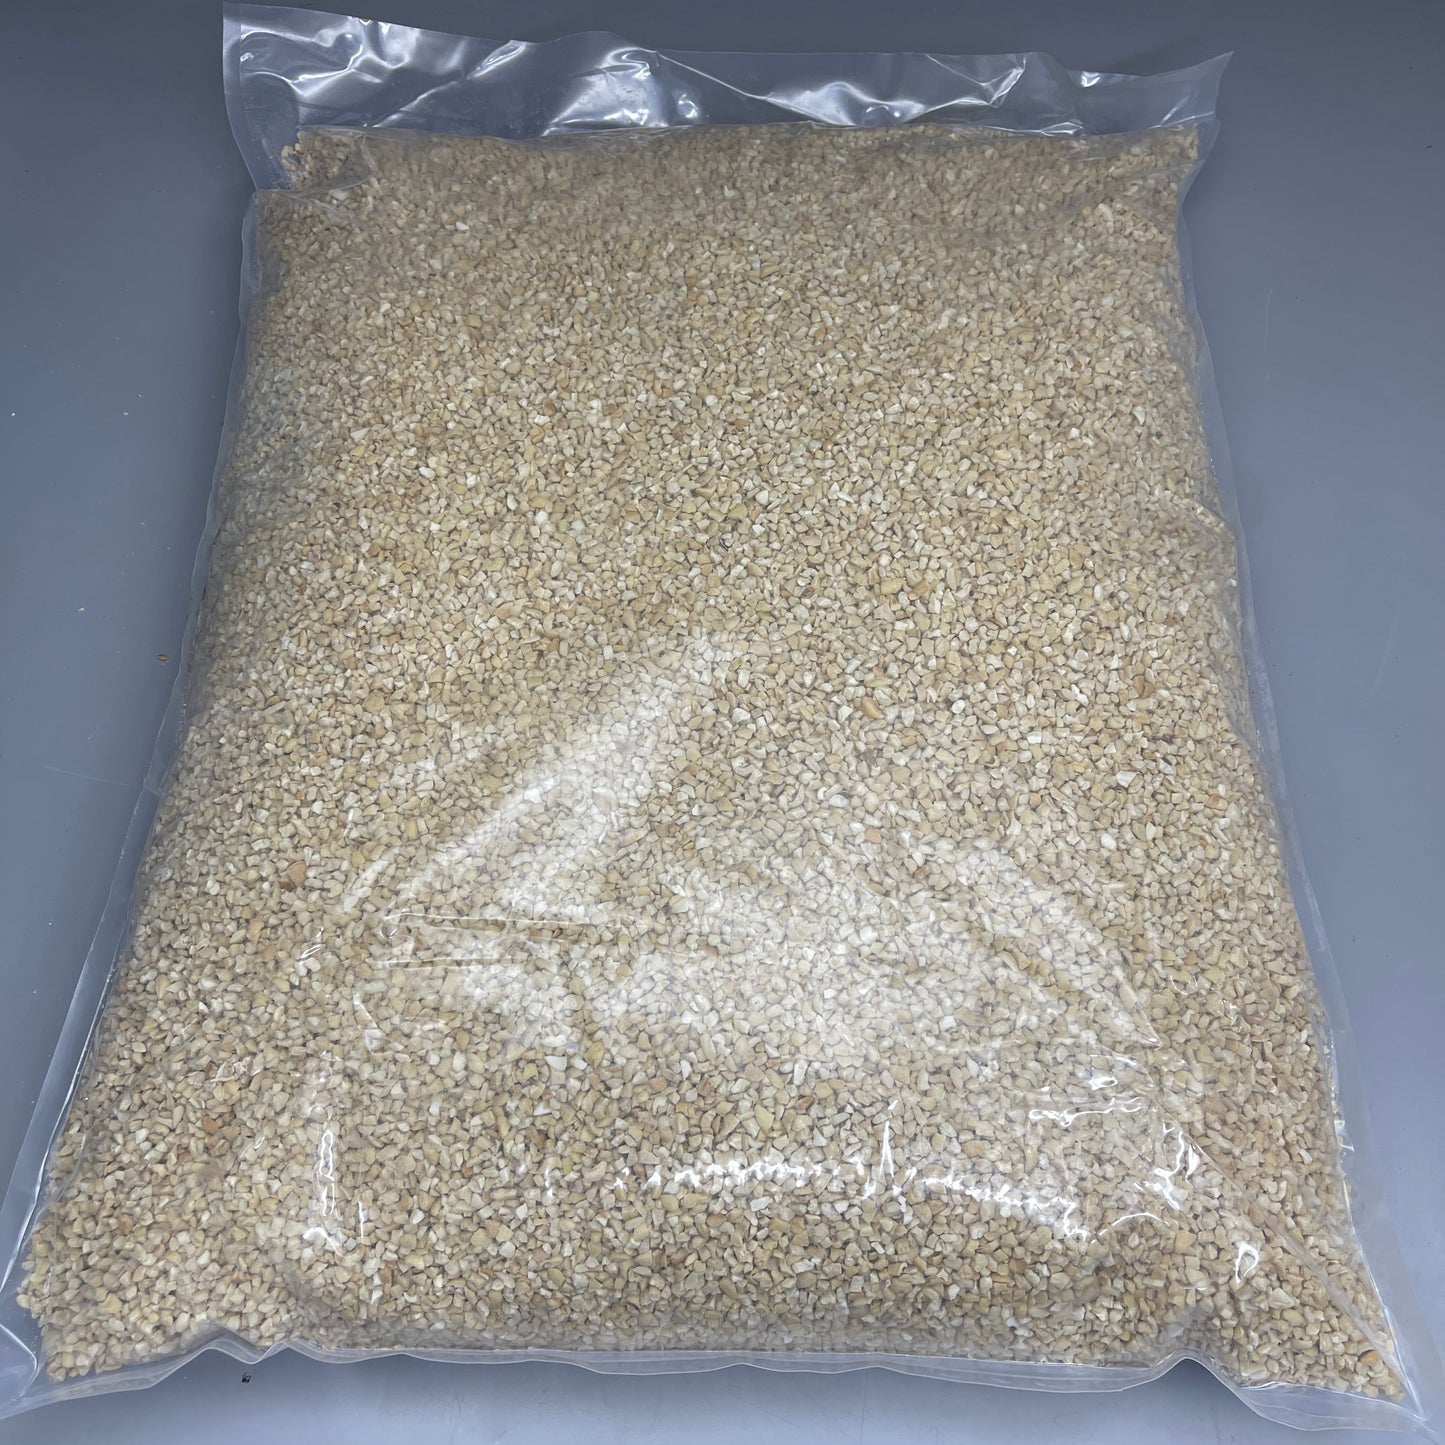 OLAM 100% Organic Blanched Cashew Kernels 50 LBS